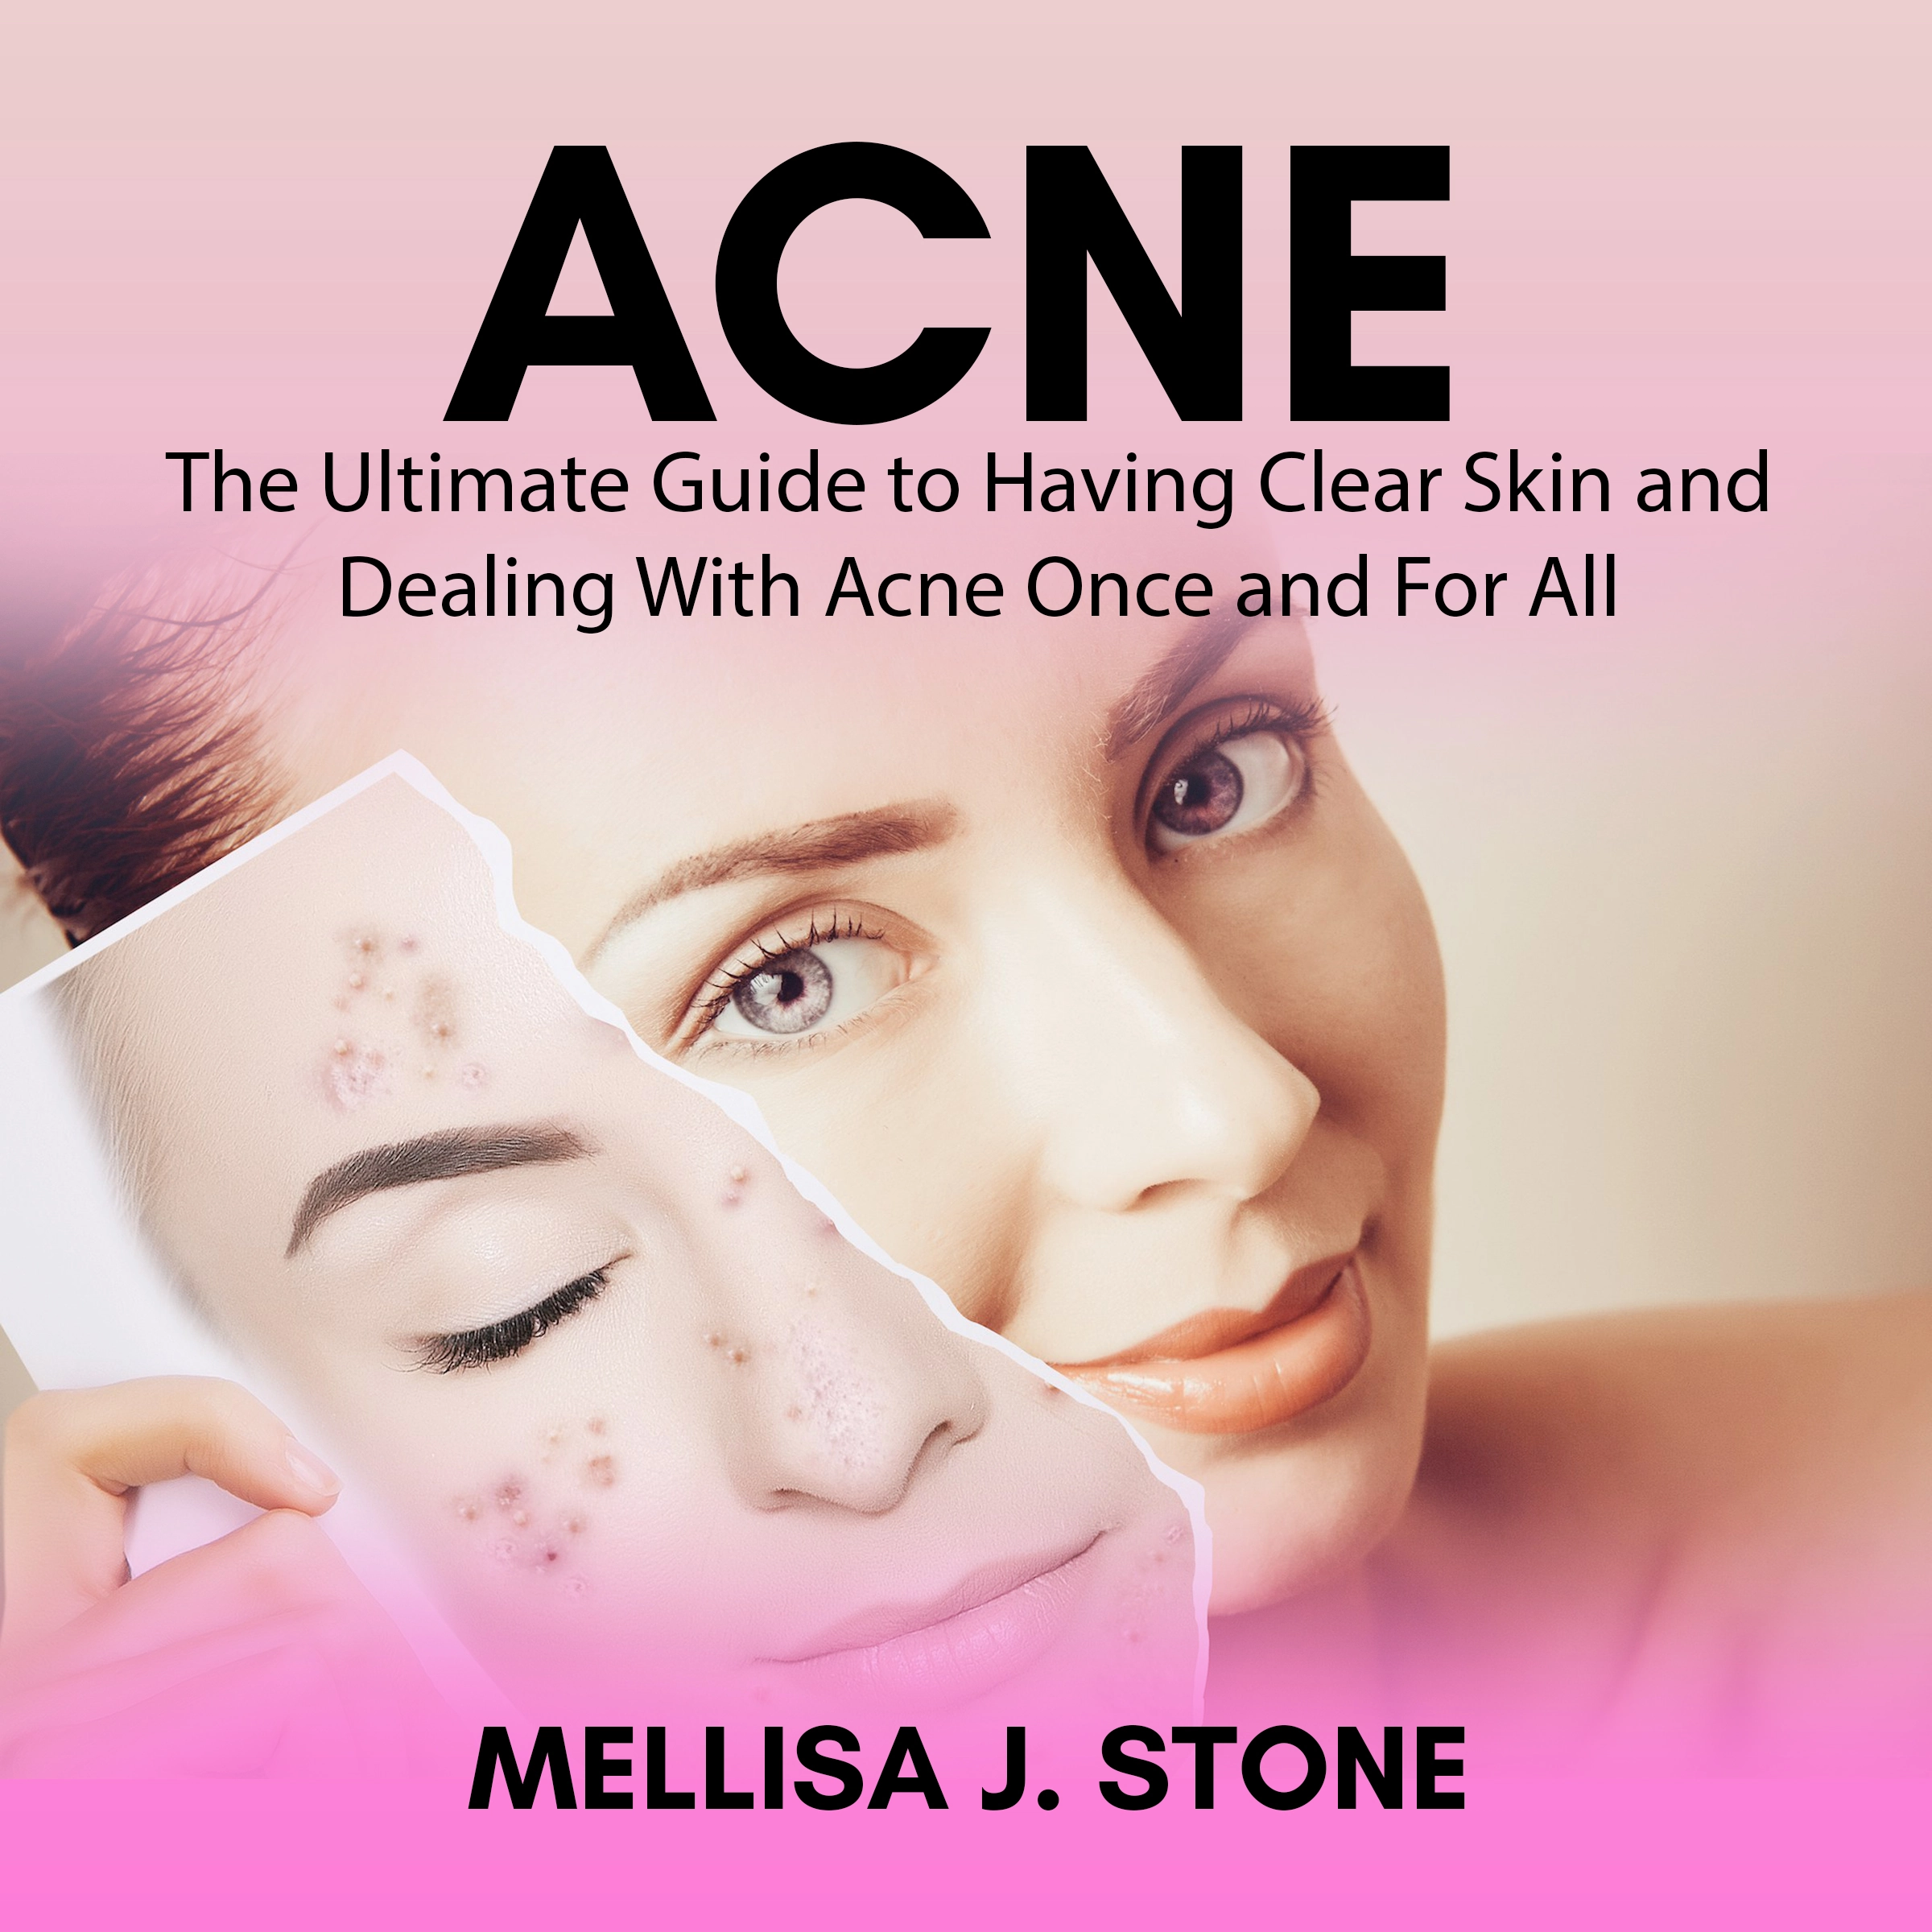 Acne: The Ultimate Guide to Having Clear Skin and Dealing With Acne Once and For All Audiobook by Mellisa J. Stone